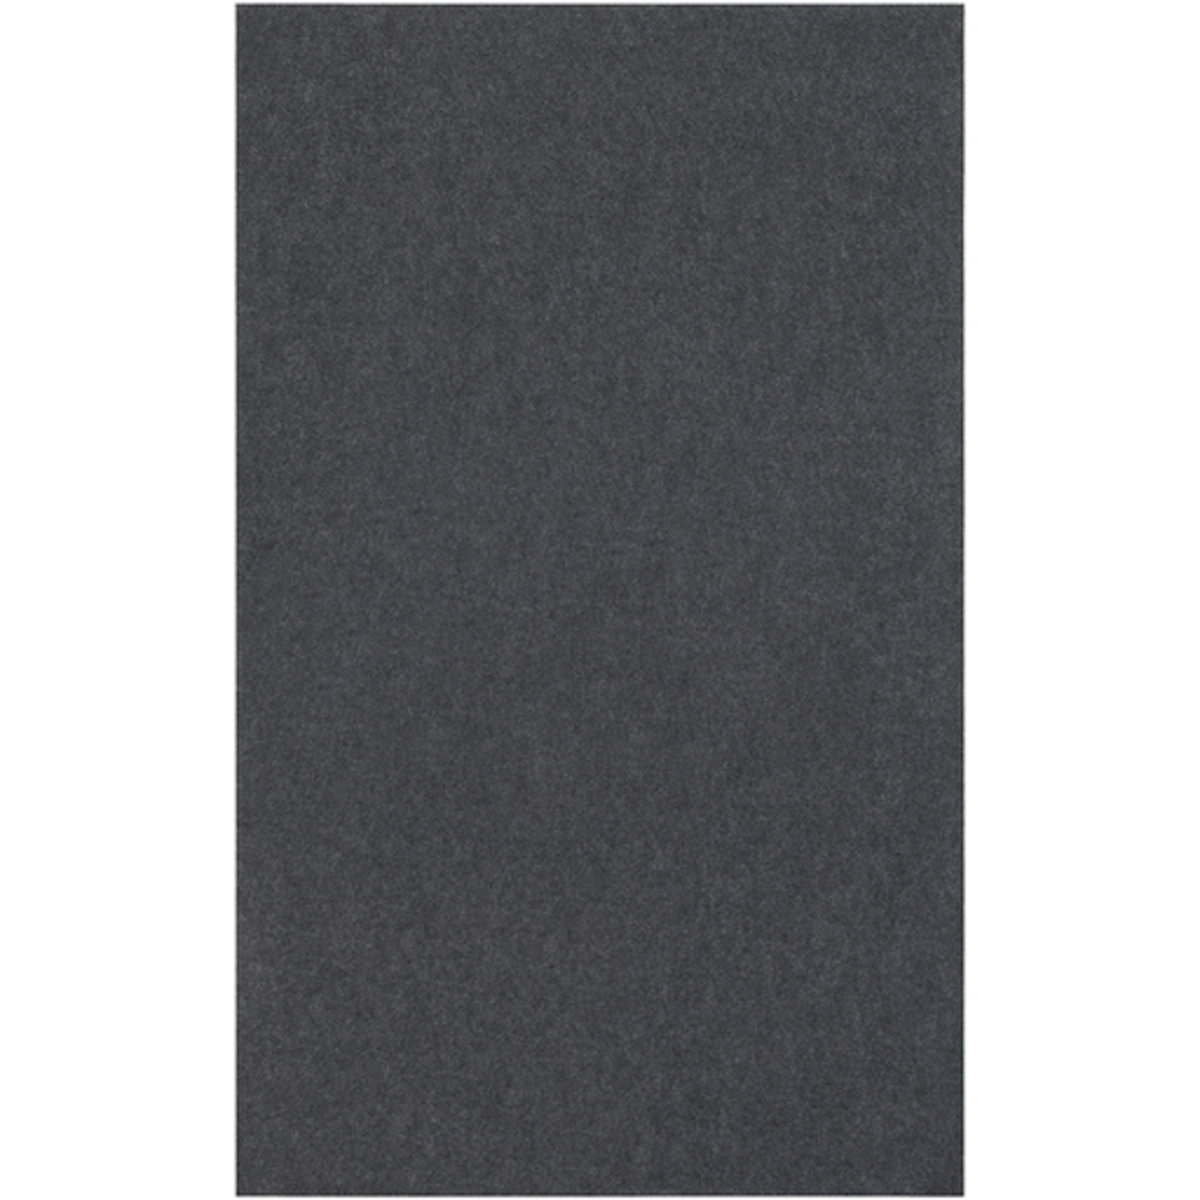 https://babettesonline.com/images/thumbs/0015147_standard-felted-6x9-rug-pad_1200.png